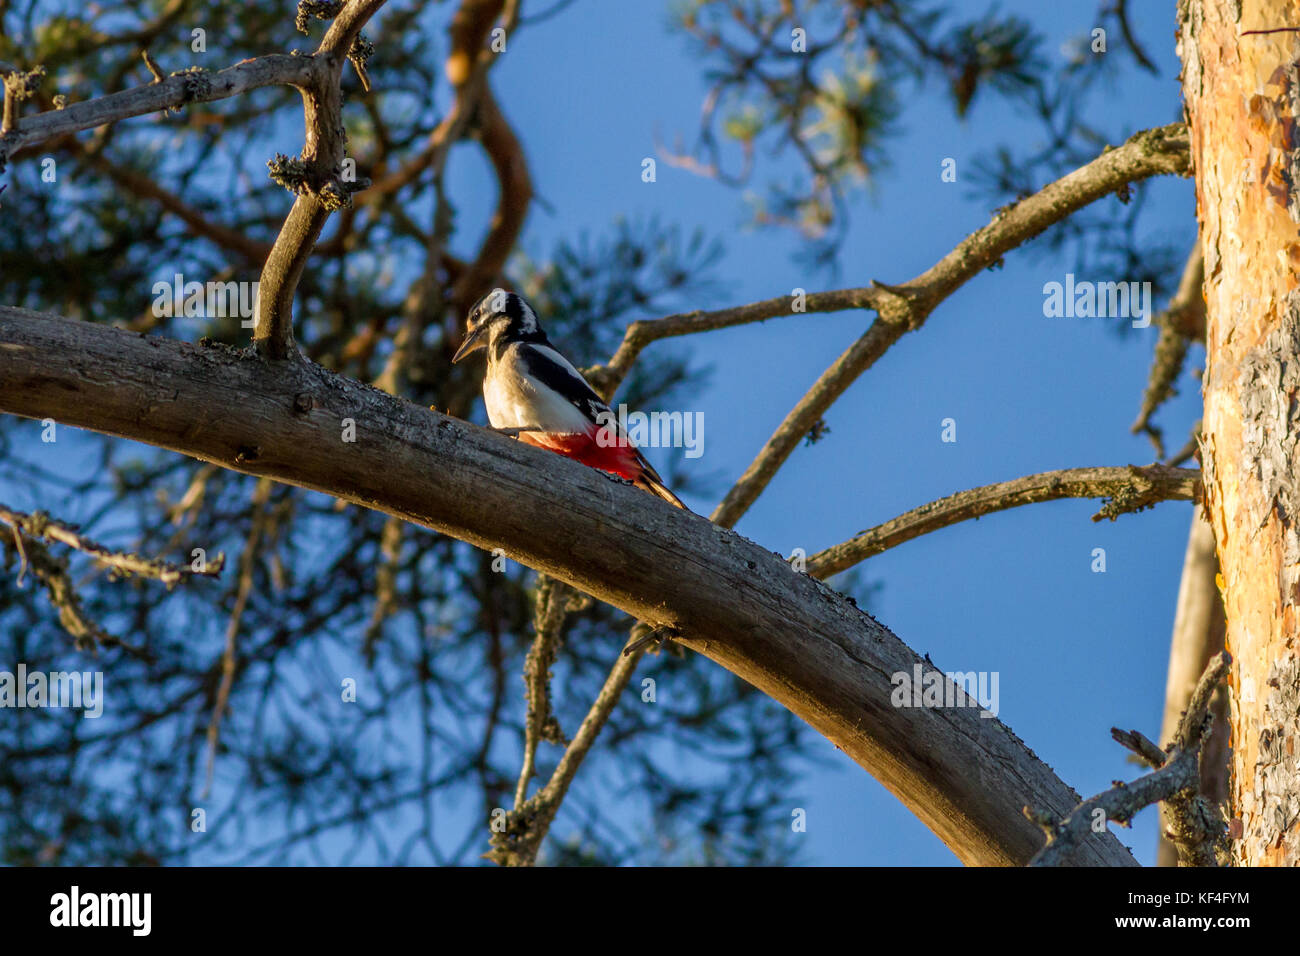 Finnish wildlife: great spotted woodpecker lit by the sun on a beautiful evening in the woods Stock Photo